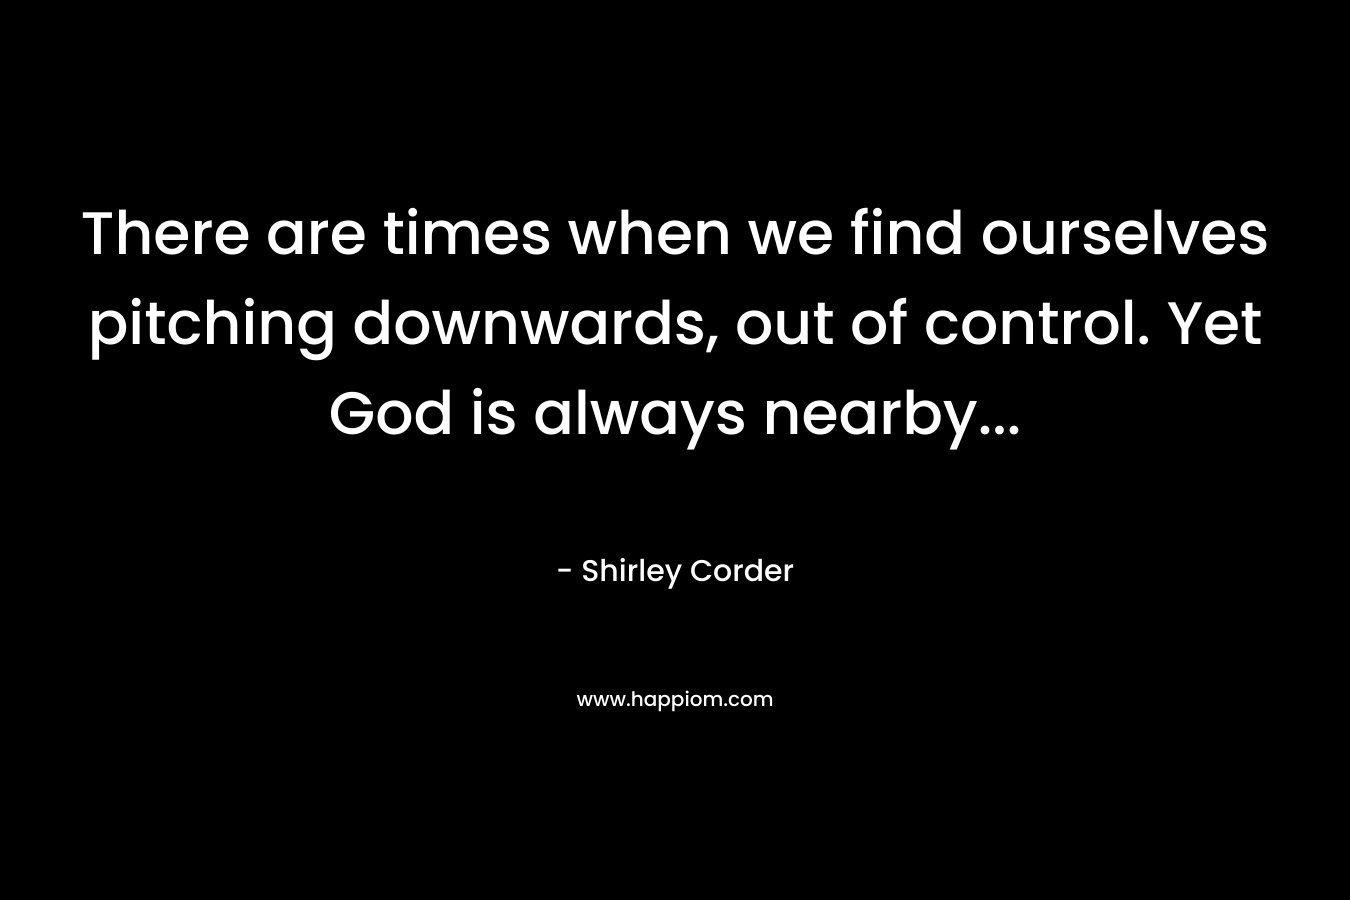 There are times when we find ourselves pitching downwards, out of control. Yet God is always nearby… – Shirley Corder